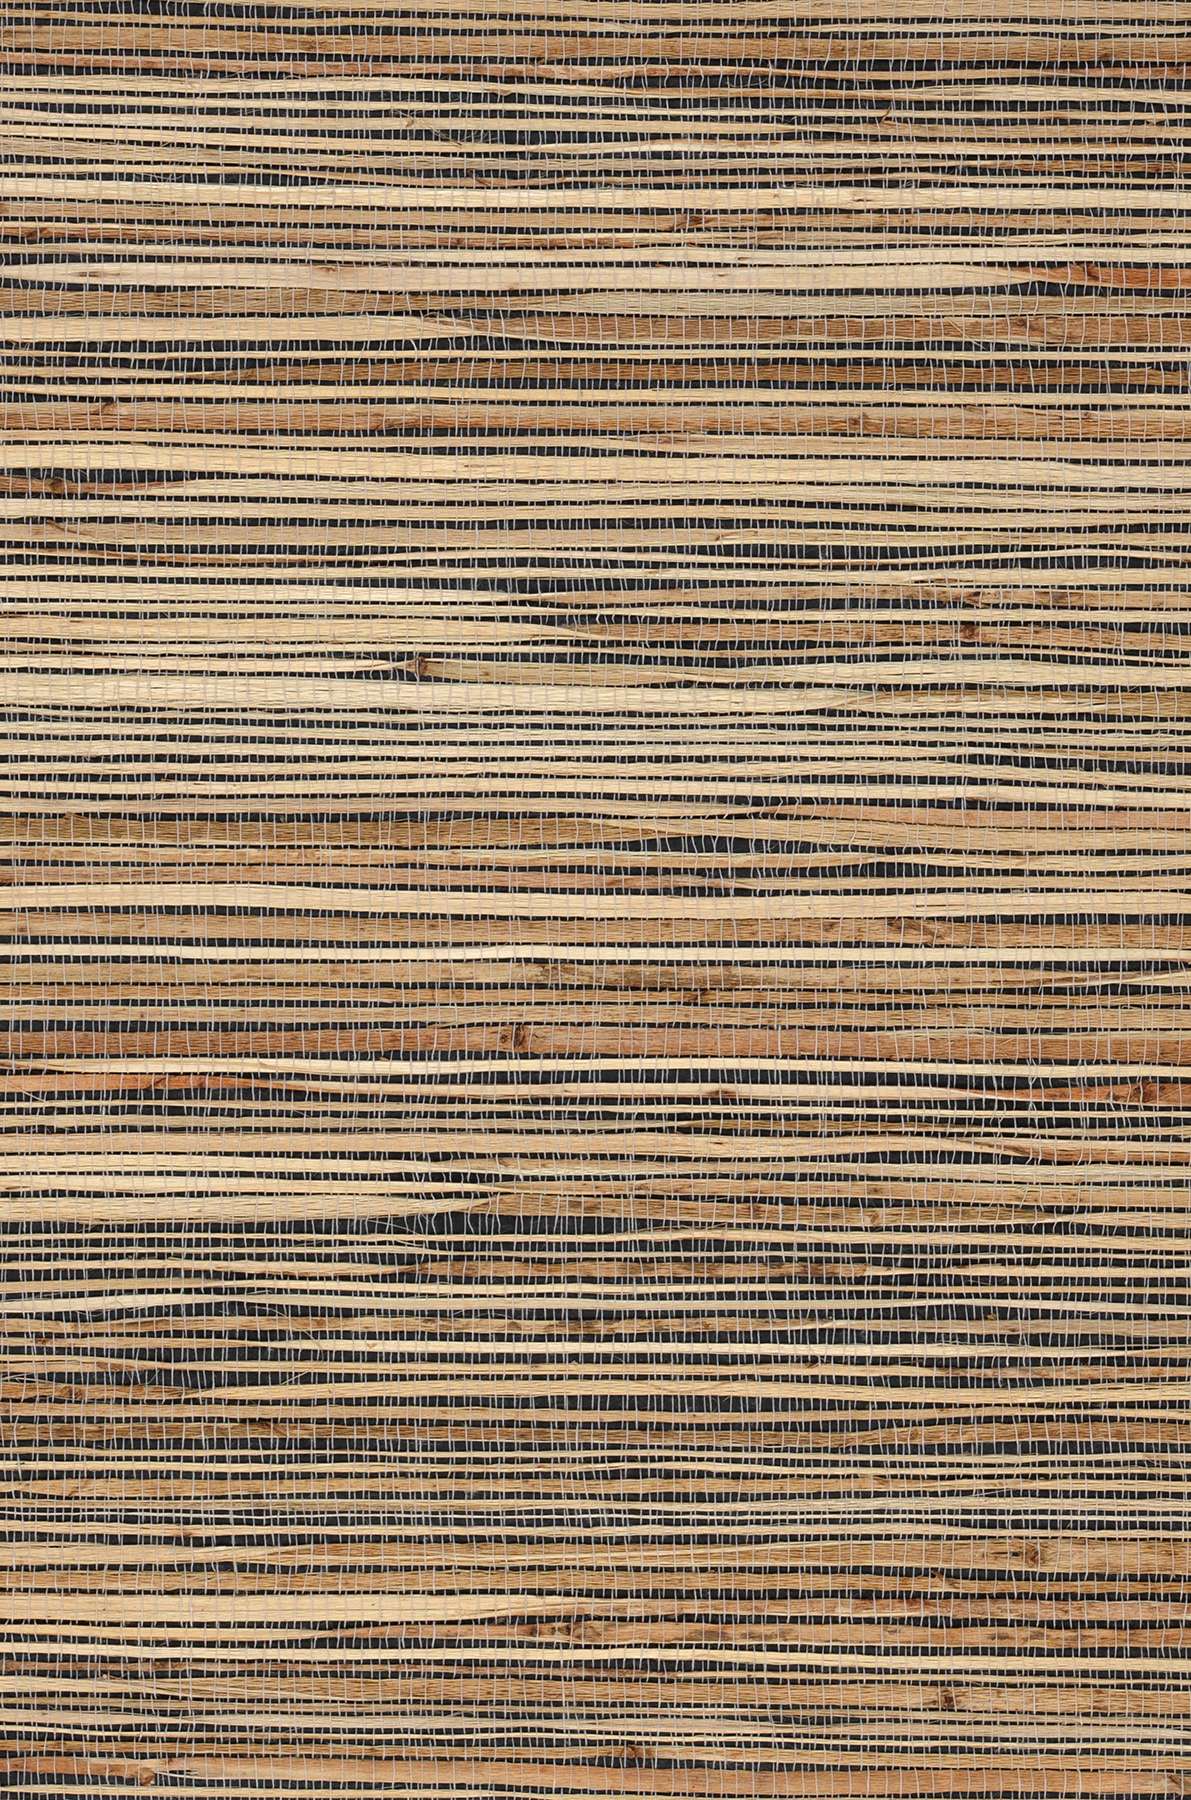 Grass on roll Wallpaper Pale Brown